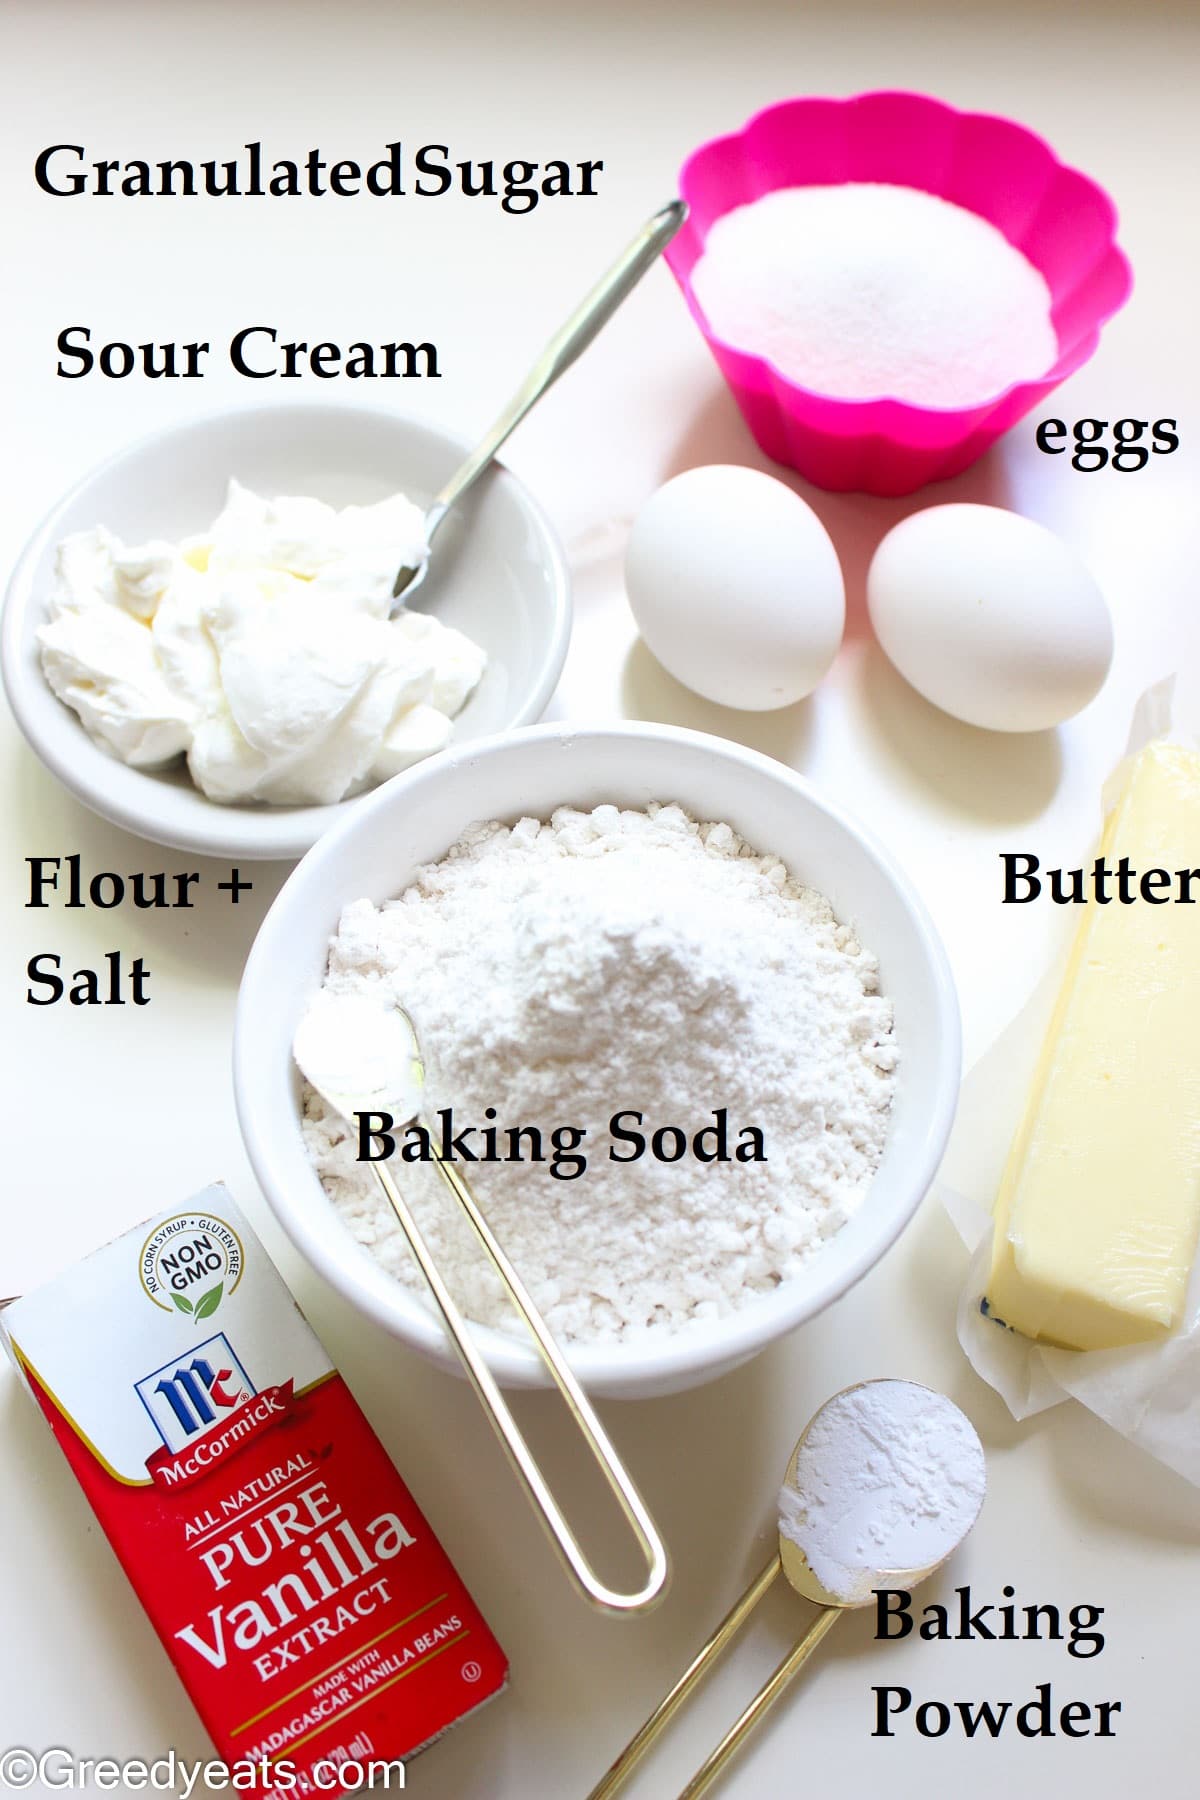 Ingredients like flour, eggs, vanilla, butter and sour cream to make coffee cake.